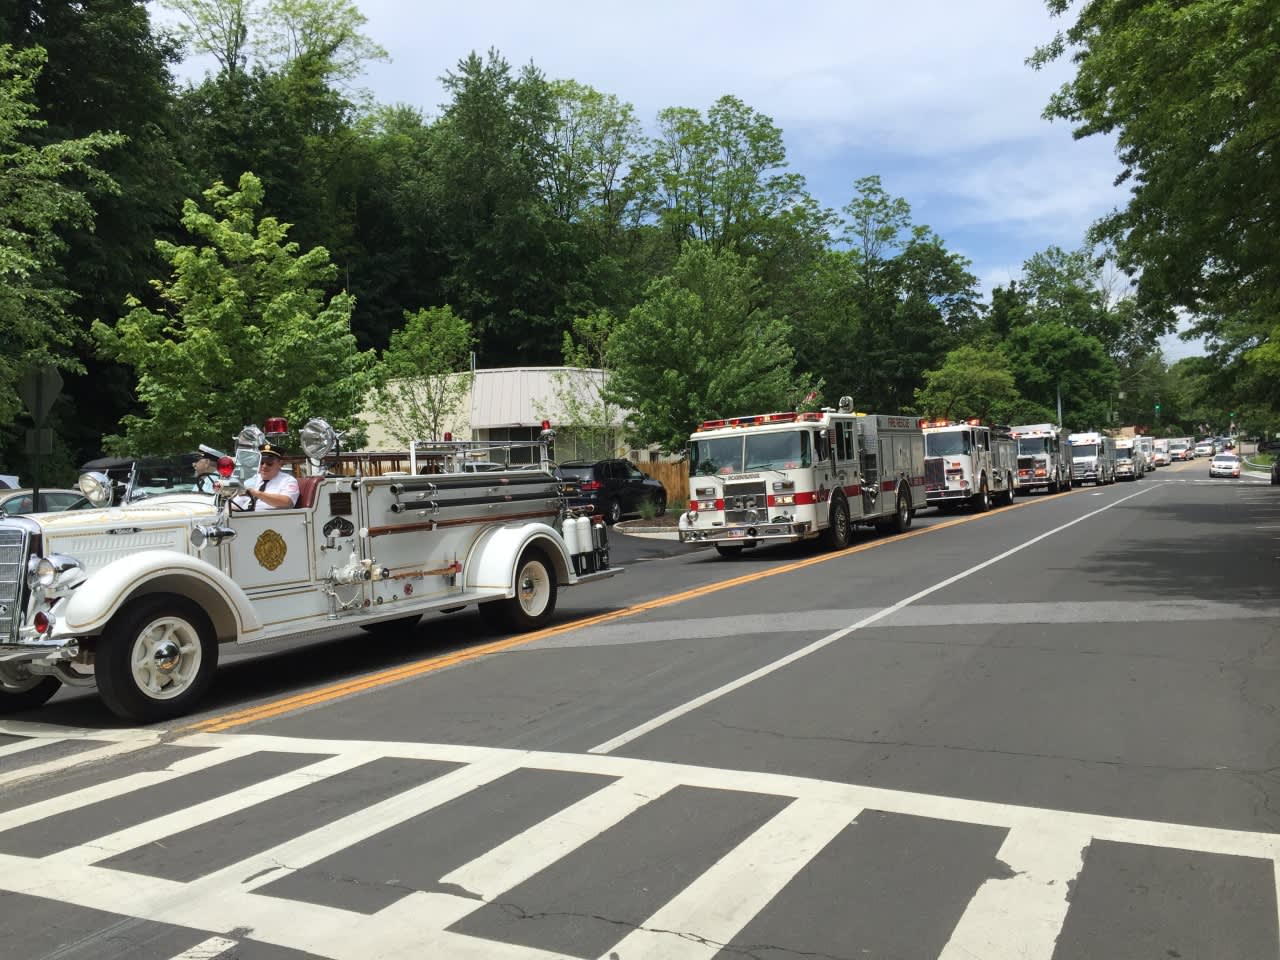 Briarcliff held its Memorial Day Parade on Monday.